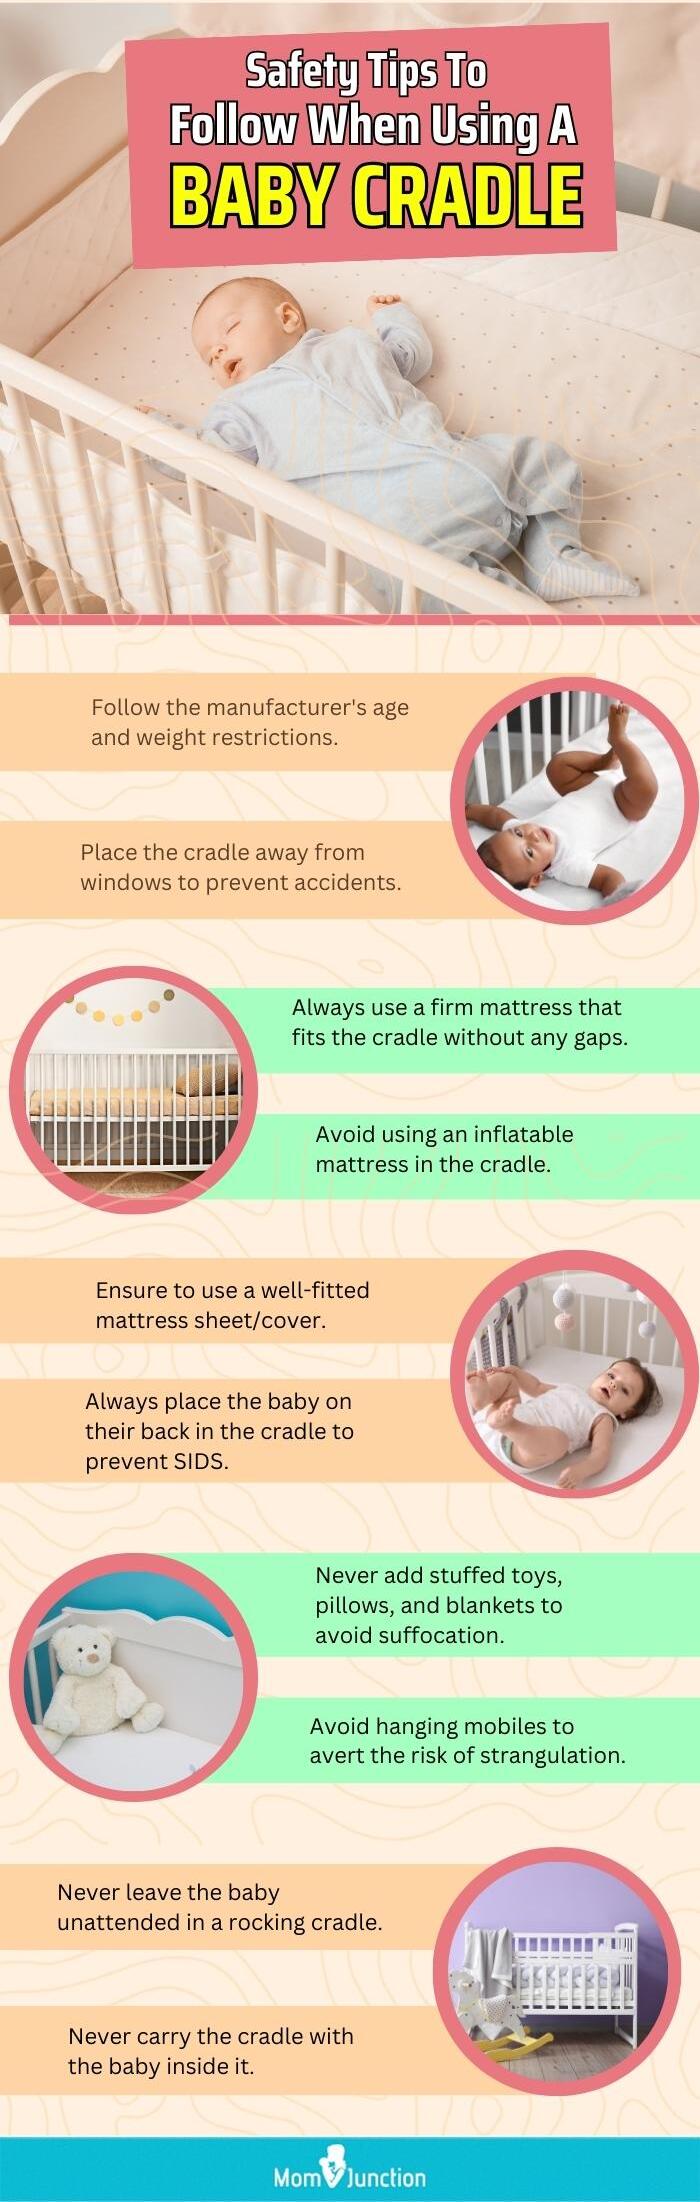 Safety Tips To Follow When Using A Baby Cradle (infographic)